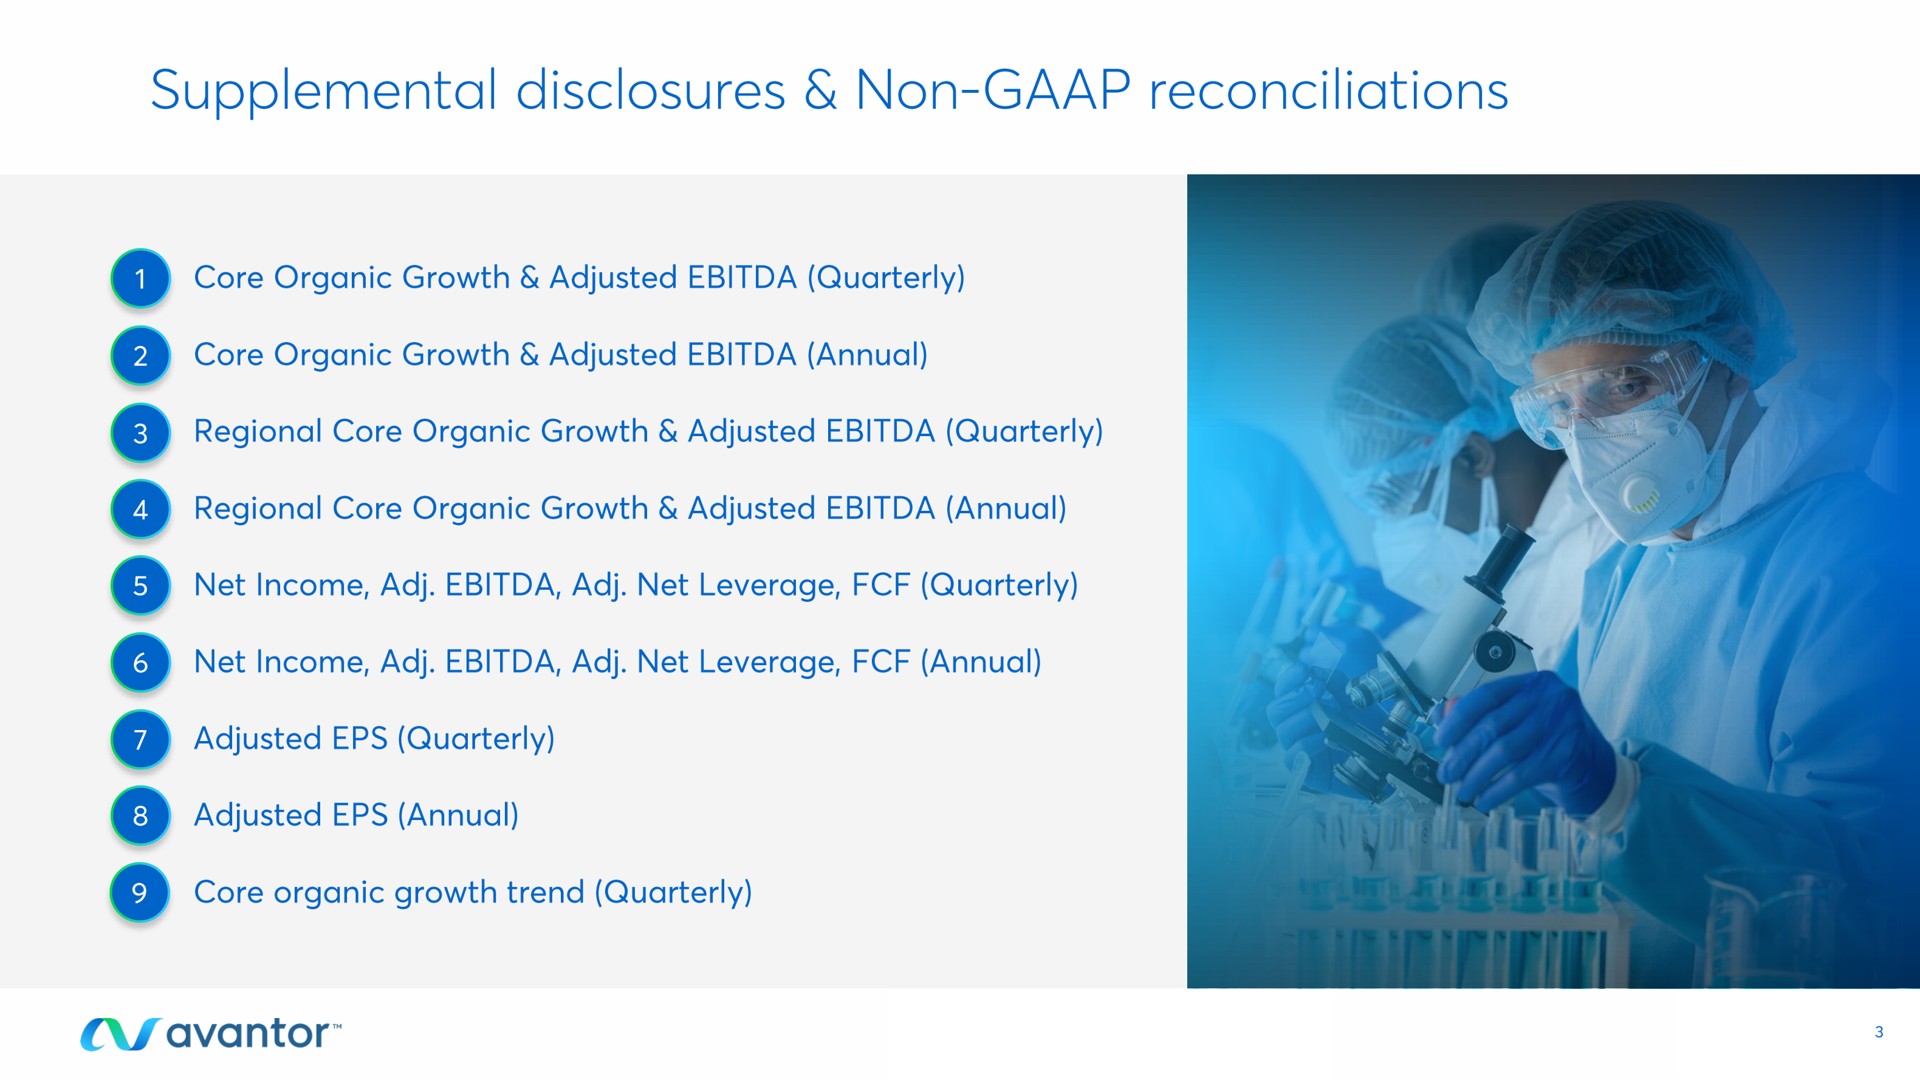 supplemental disclosures non reconciliations core organic growth adjusted quarterly core organic growth adjusted annual regional core organic growth adjusted quarterly regional core organic growth adjusted annual net income net leverage quarterly adjusted quarterly net income net leverage annual core organic growth trend quarterly adjusted annual | Avantor